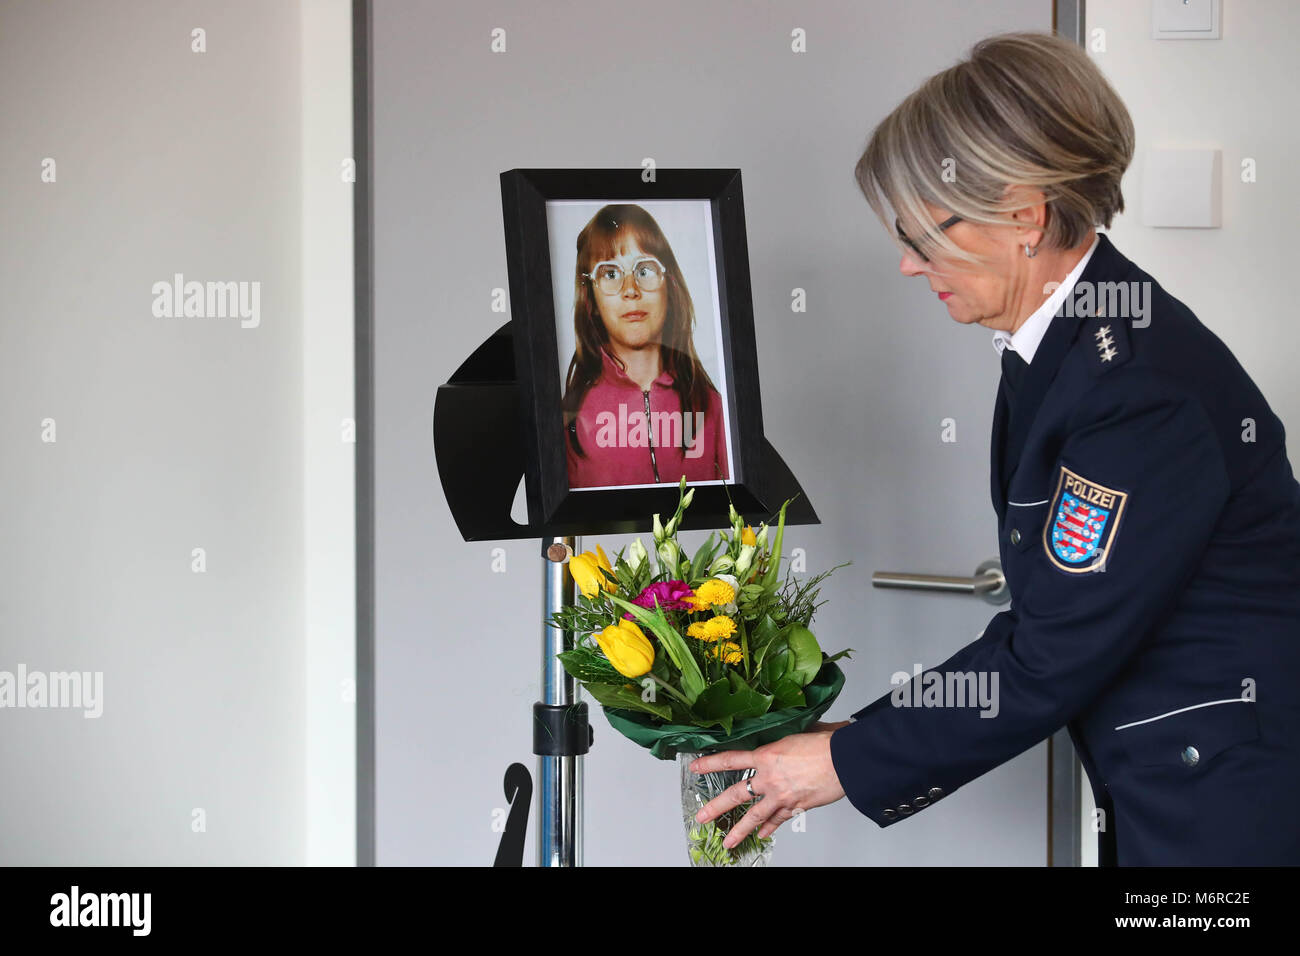 06 March 2018, Germany, Jena: An officer of Jena's Police presenting a bouquet of flowers under the picture of murdered Stephanie Drews ahead of a press conference by the Jena Police. The reason for the press conference is the resolution of the 1991 case of Stephanie Drew's murder. A man suspected of the crime was arrested as part of the investigation. The case is the oldest of three cases of child murder in Jena and Weimar under investigation by the special commission 'Cold cases' since November 2016. Photo: Bodo Schackow/dpa-Zentralbild/dpa Stock Photo